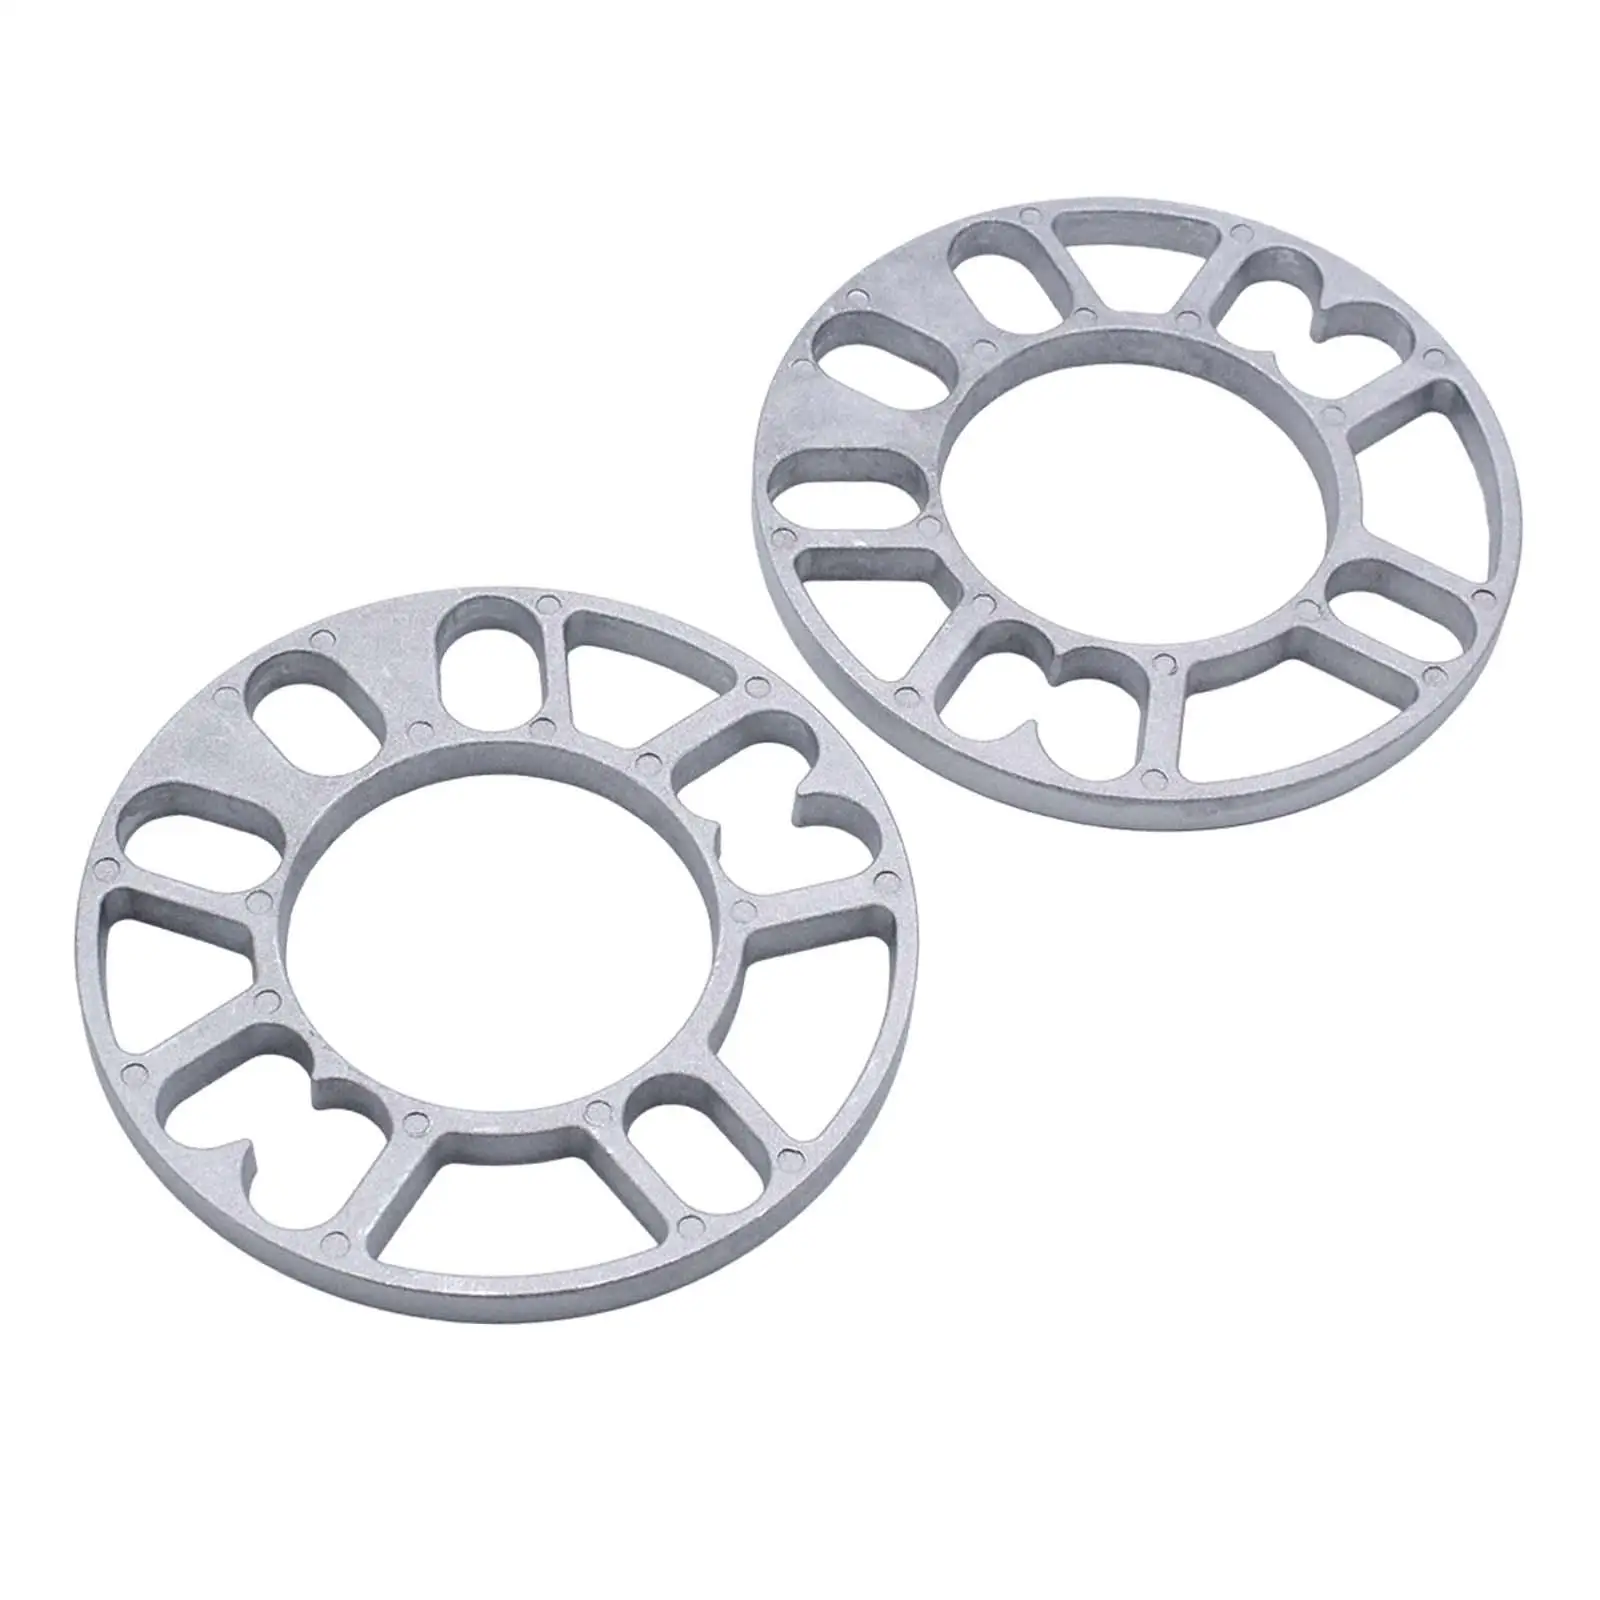 2Pcs Wheel Spacers Hub Spacer Shims Universal Accessories Aluminum Alloy for